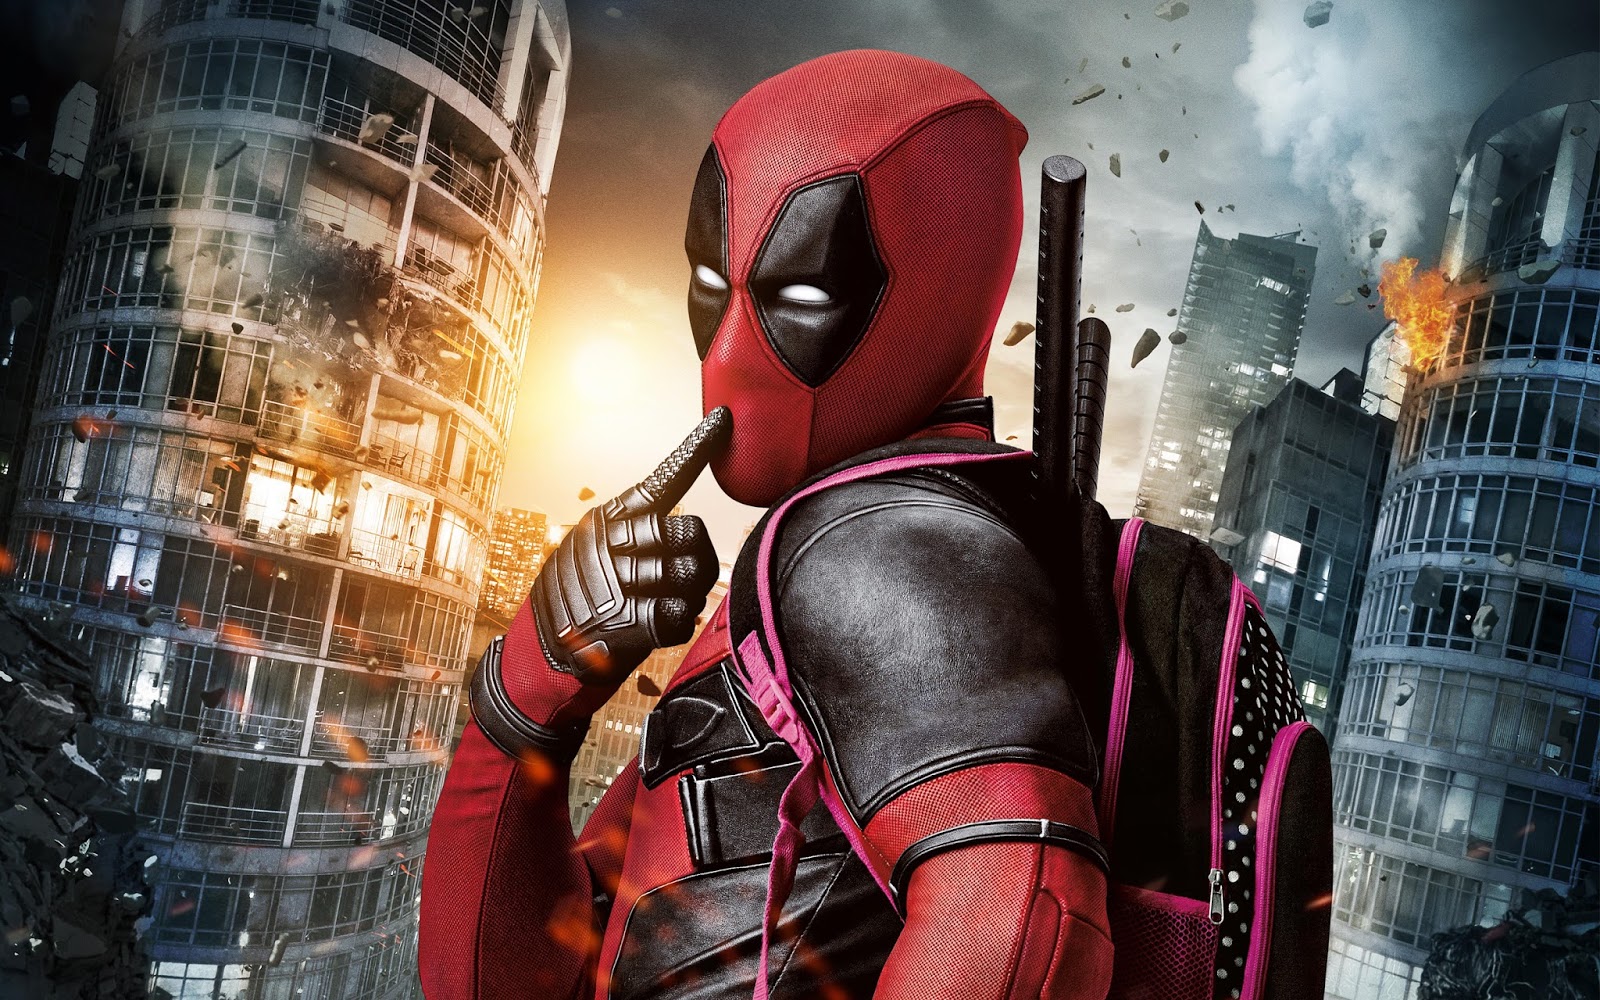 Deadpool Game System Requirements For Pc System Requirements